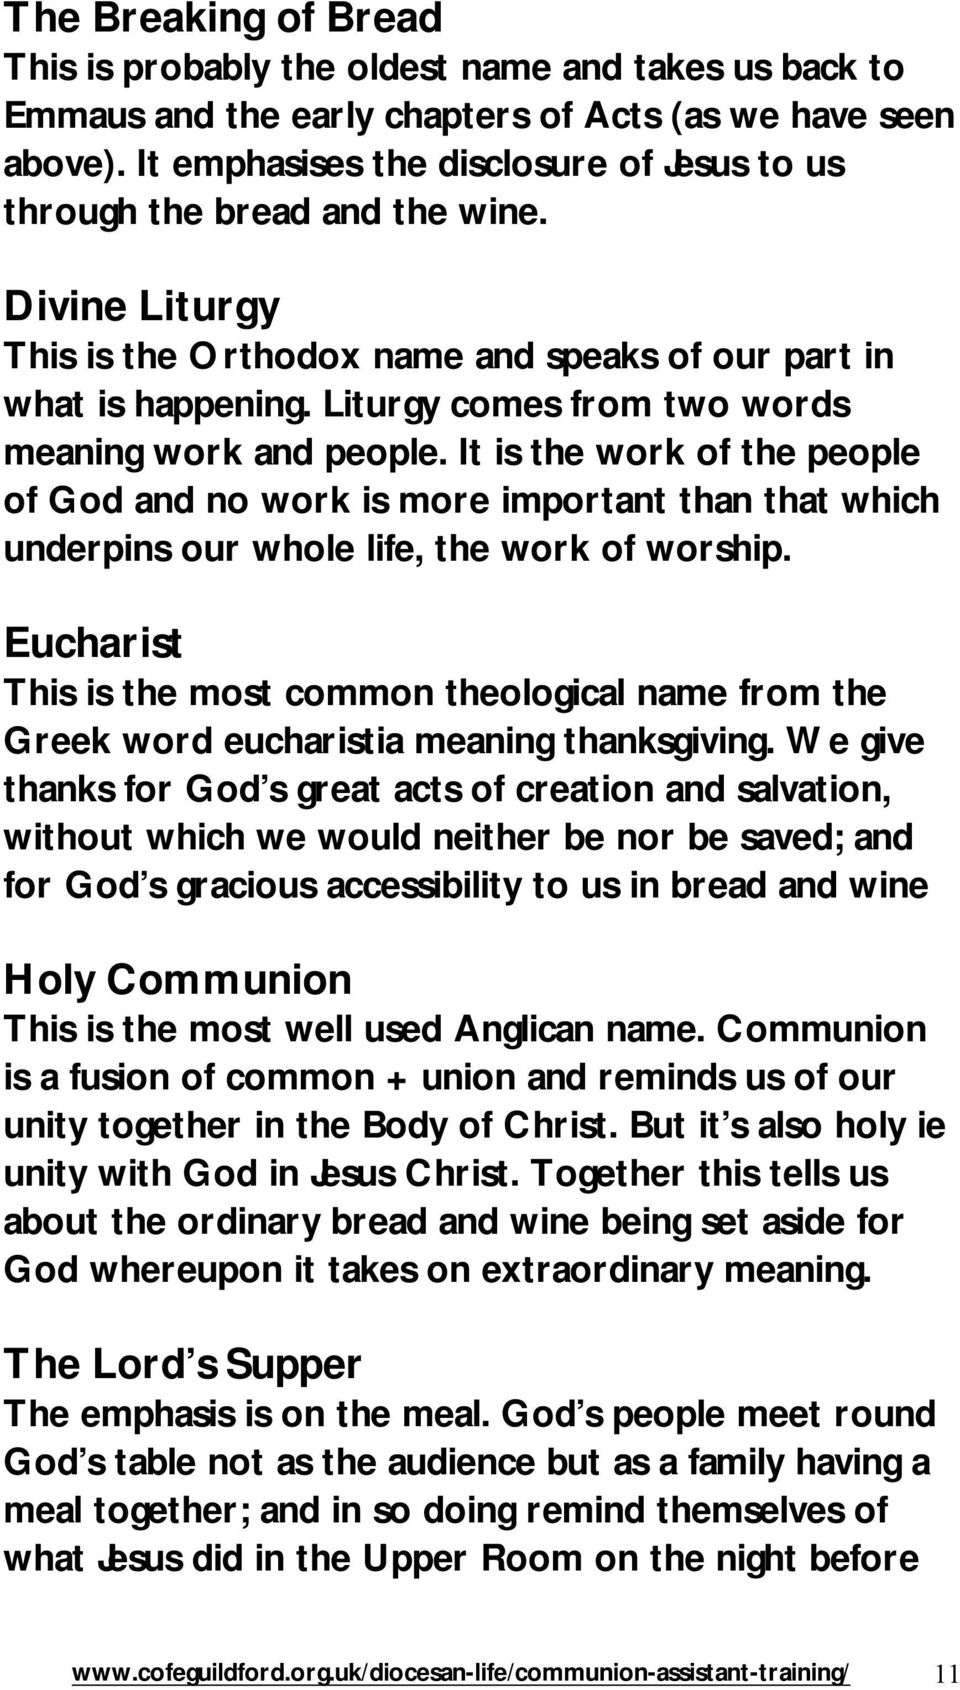 Liturgy comes from two words meaning work and people. It is the work of the people of God and no work is more important than that which underpins our whole life, the work of worship.